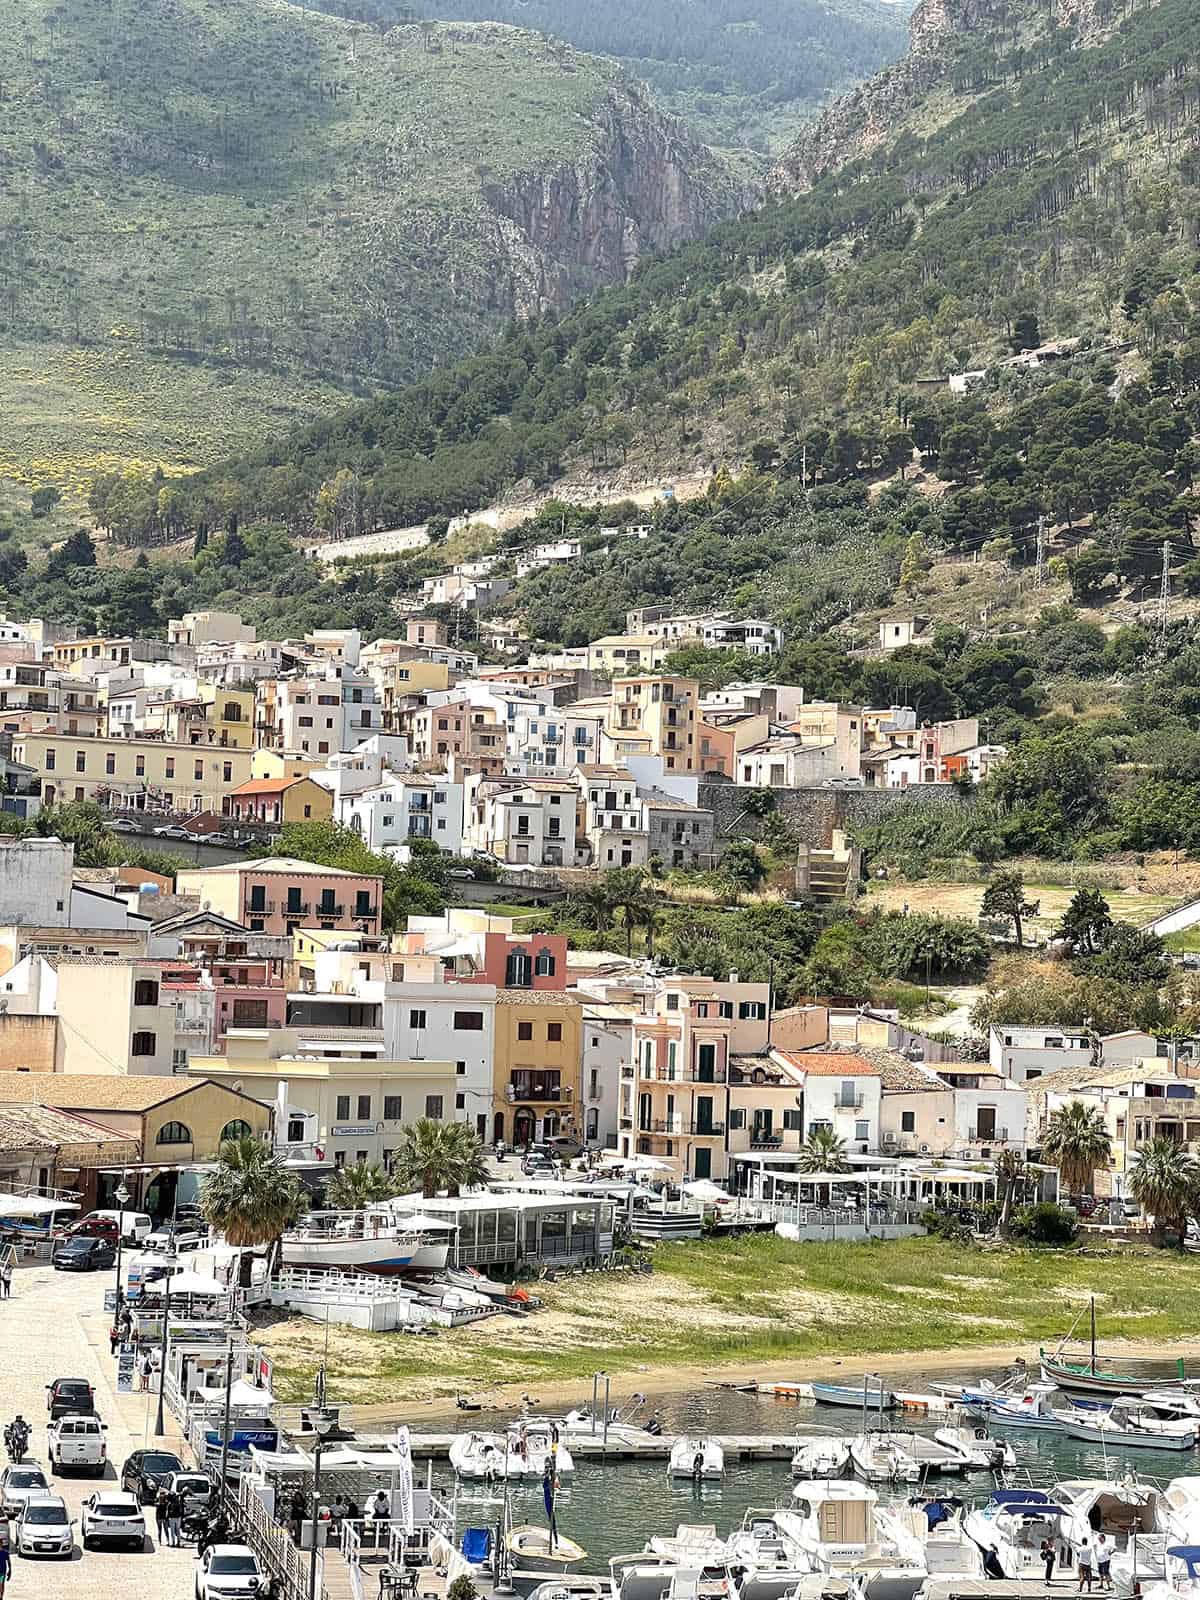 An image of the houses on the hillside of Castellamare Del Golfo in Sicily